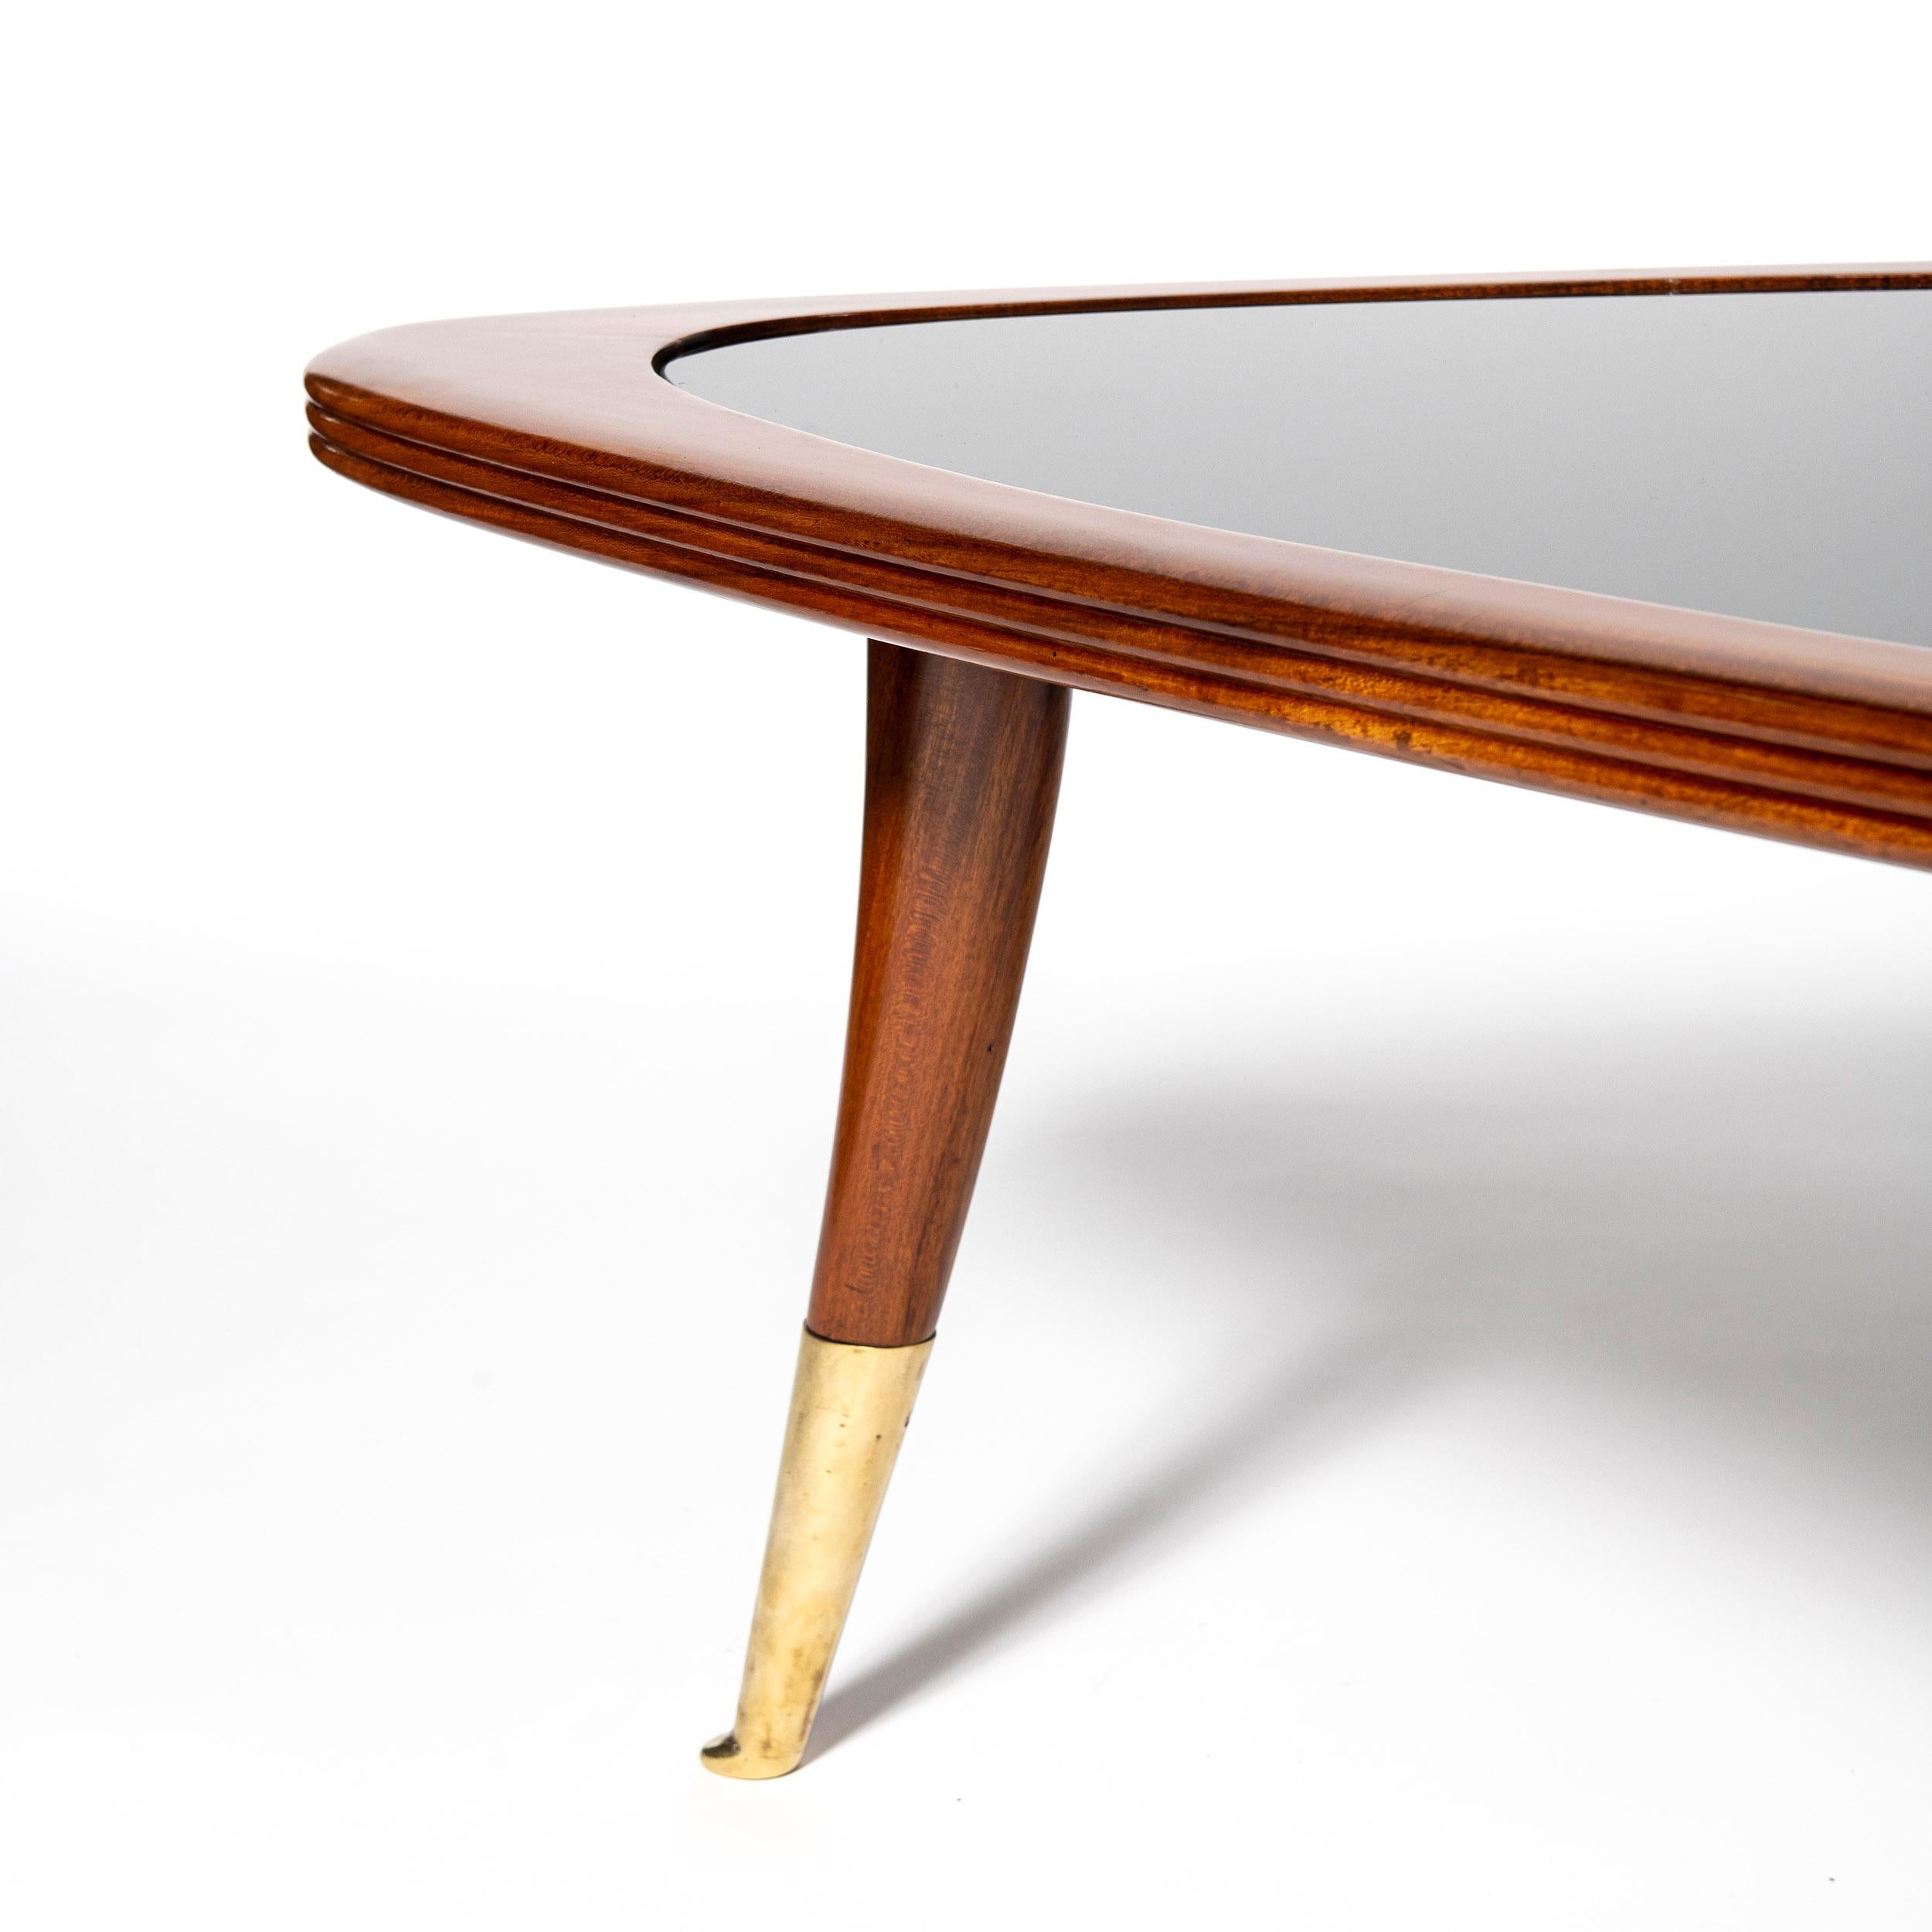 Wood, Glass and Bronze Low table by Englander & Bonta, Argentina, circa 1950.